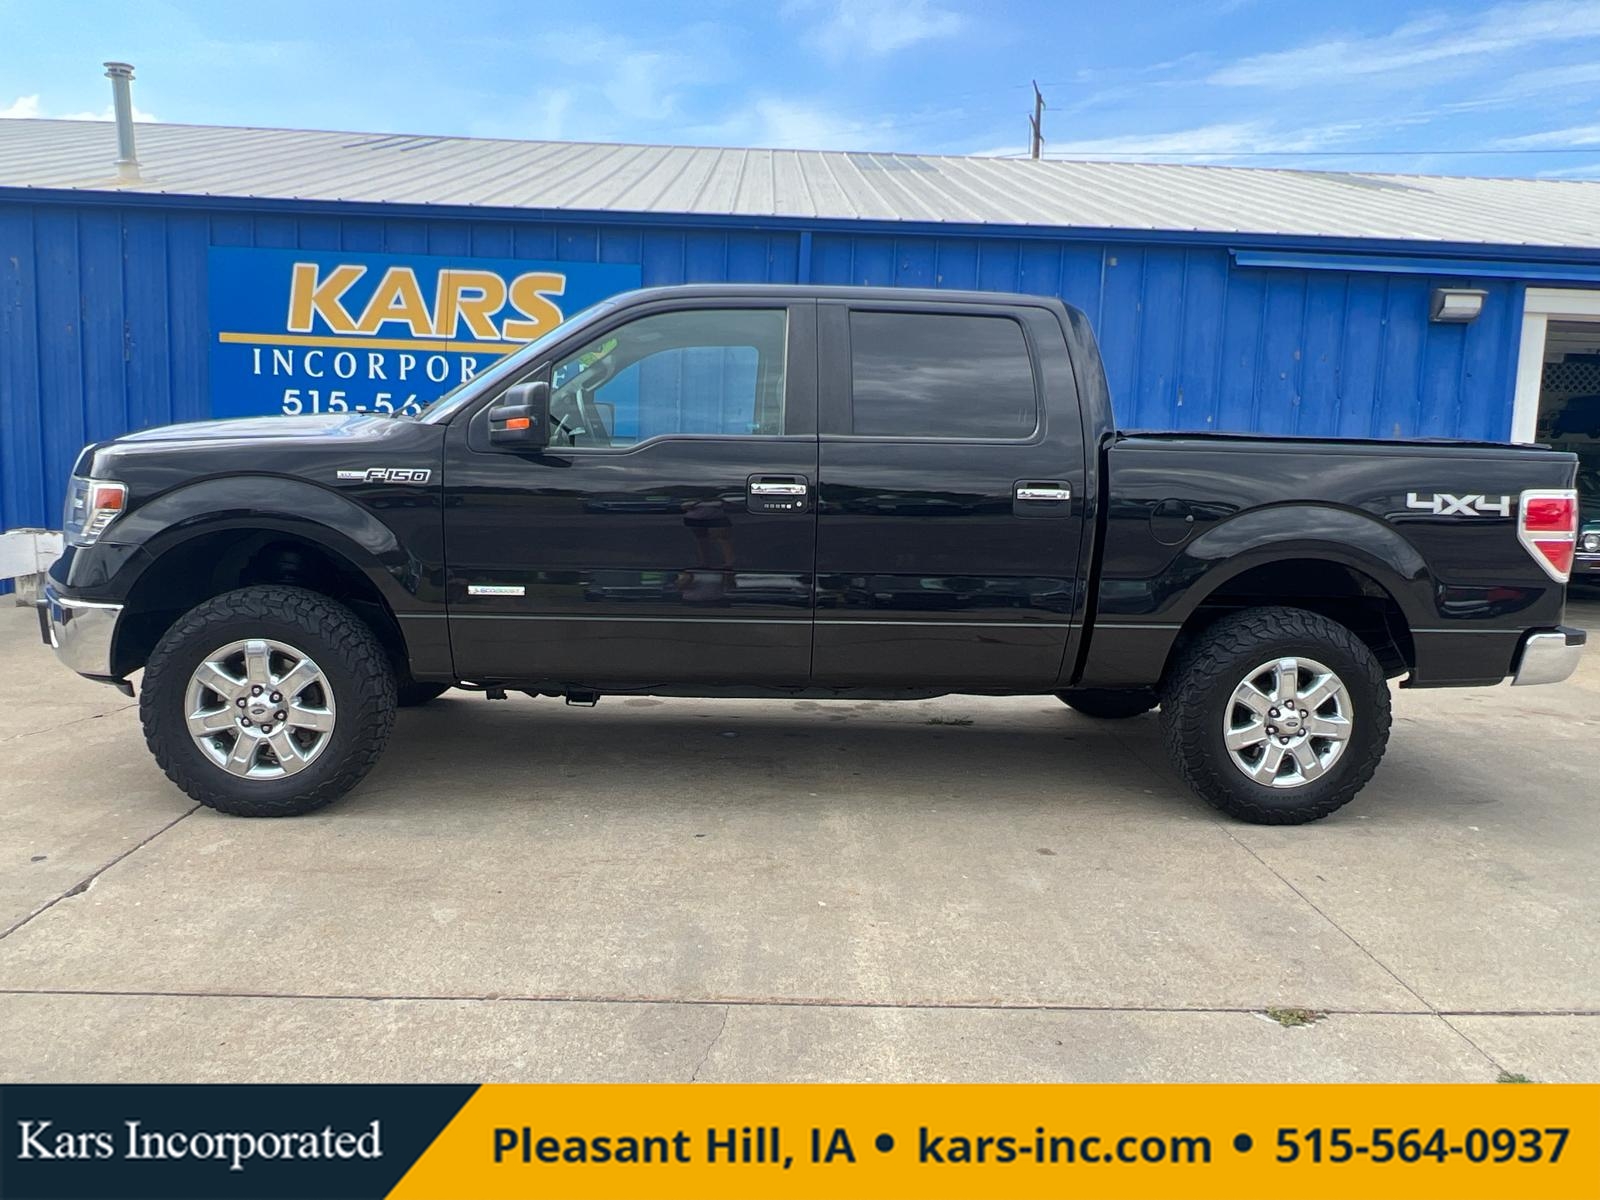 2014 Ford F-150 XLT SUPERCREW 4WD  - E05497P  - Kars Incorporated